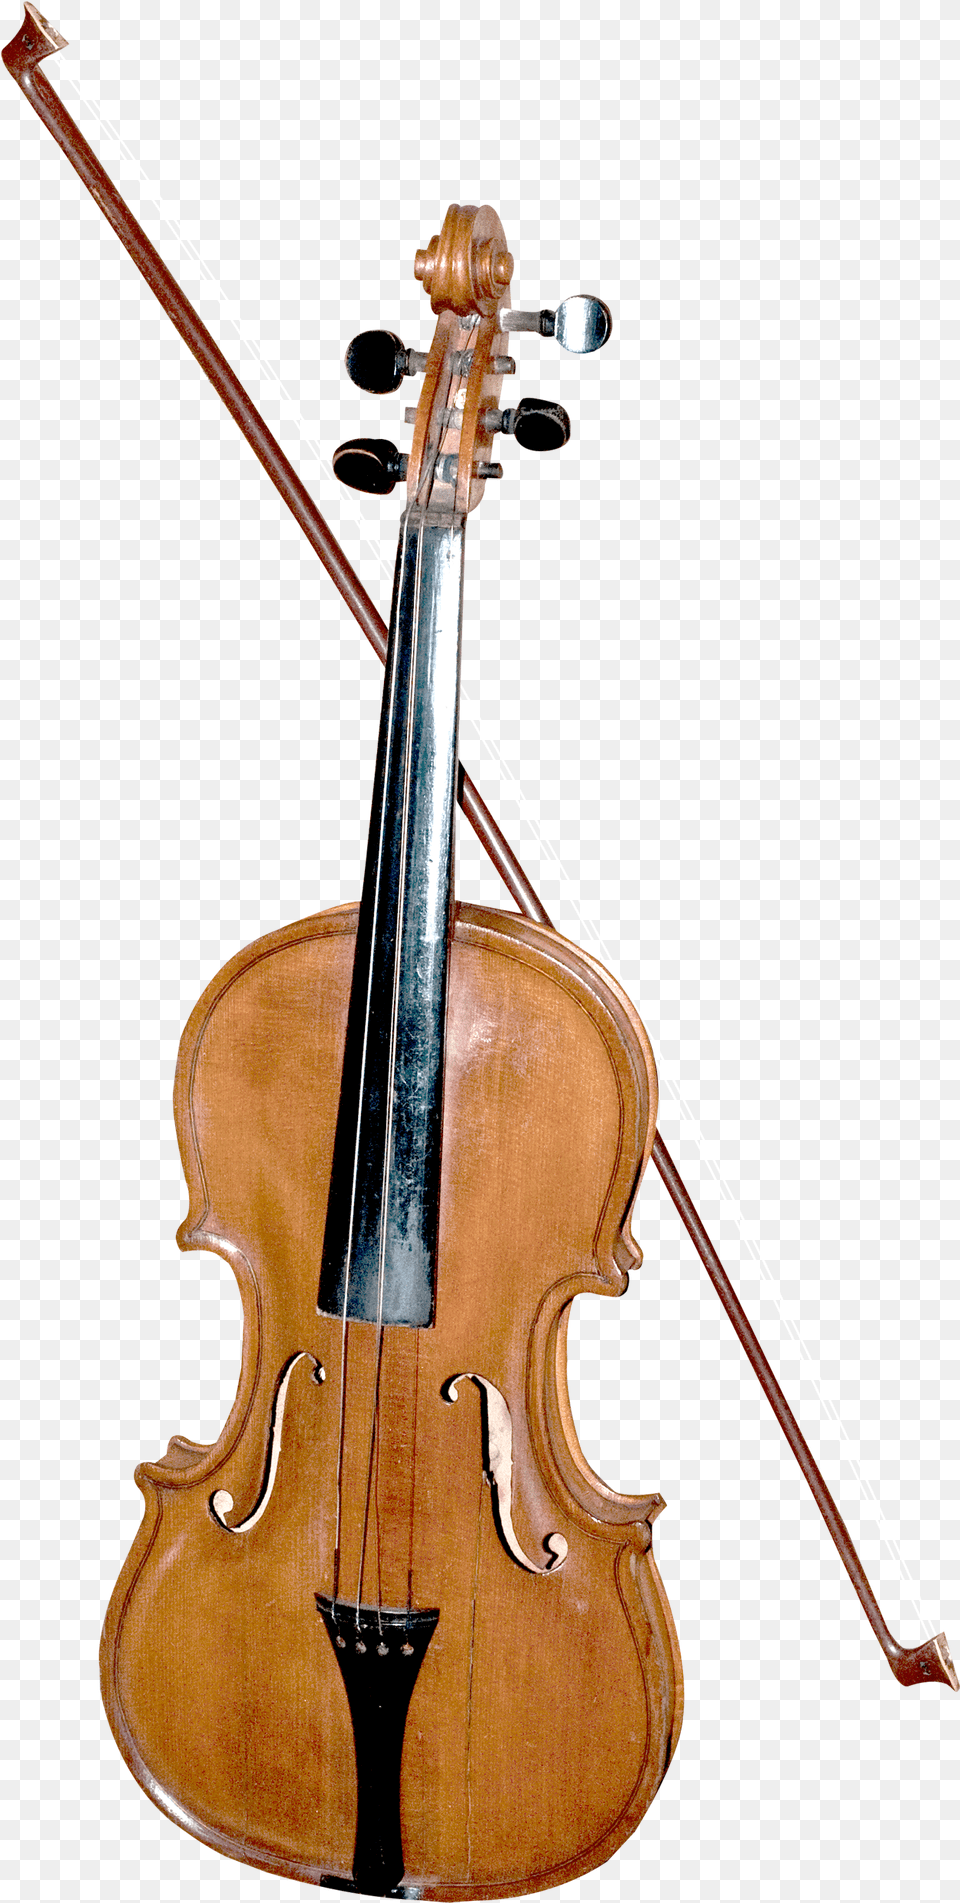 Musical Instrument, Violin, Cello Png Image